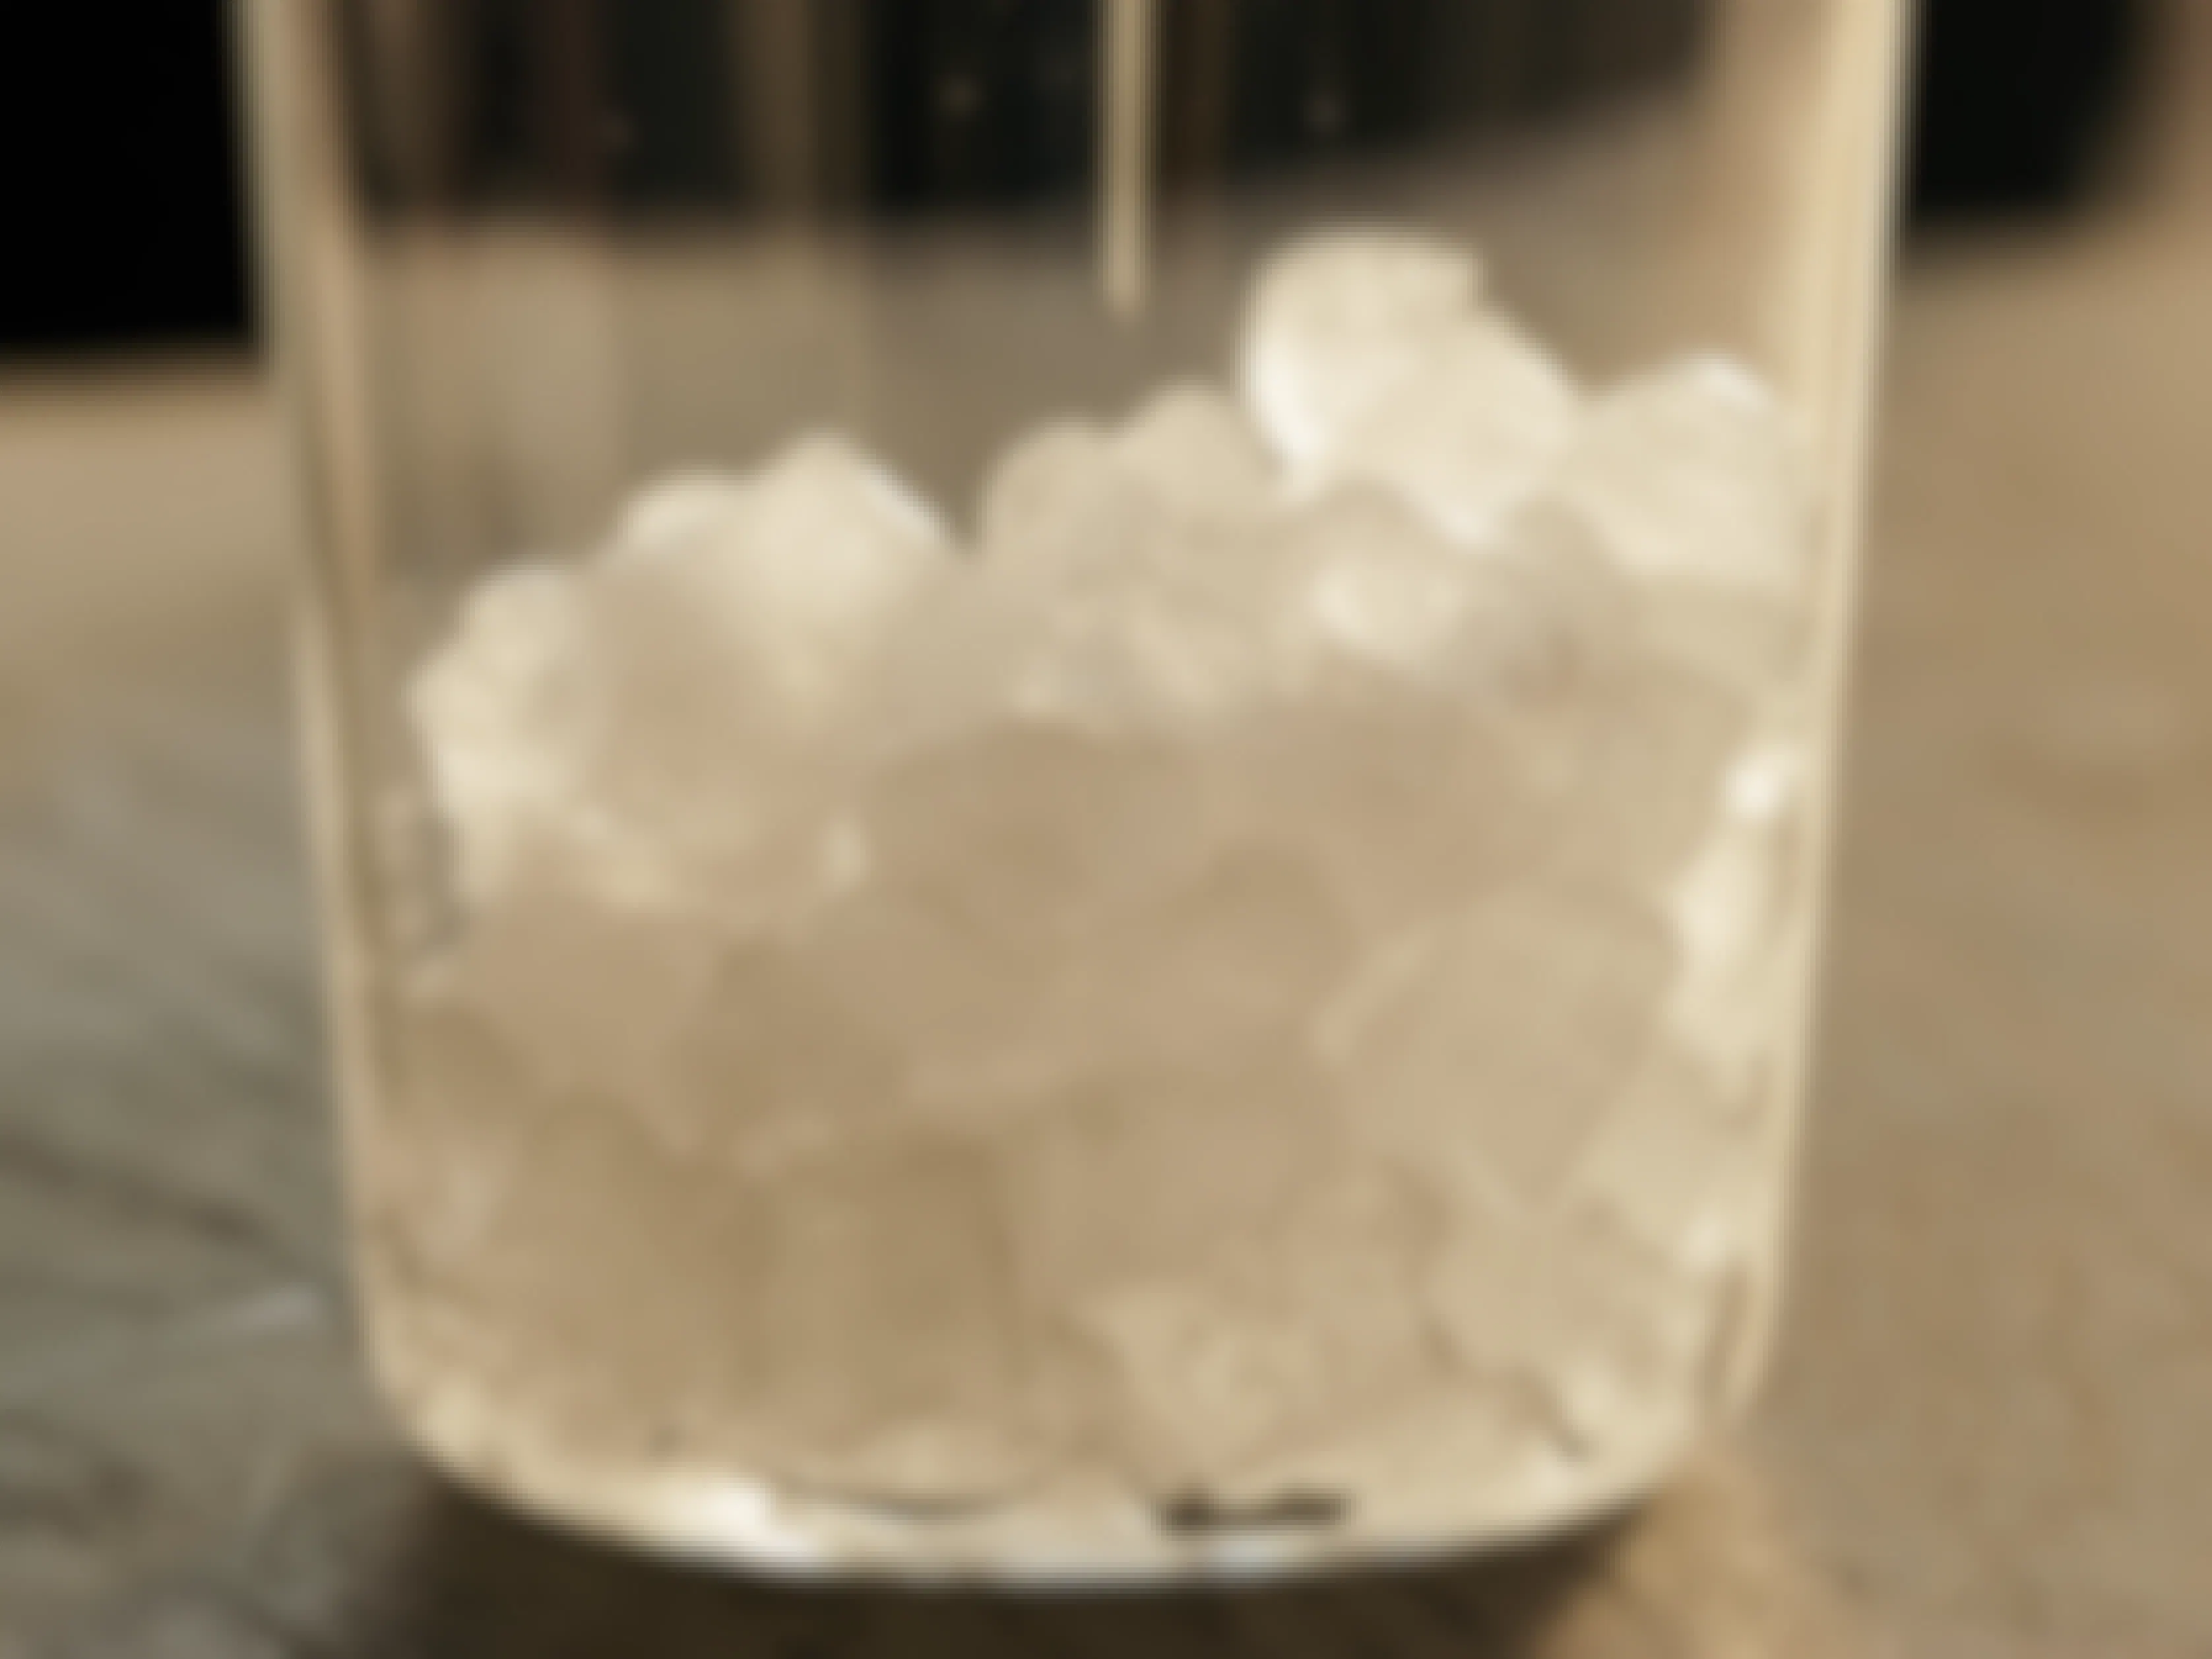 nugget ice in a glass